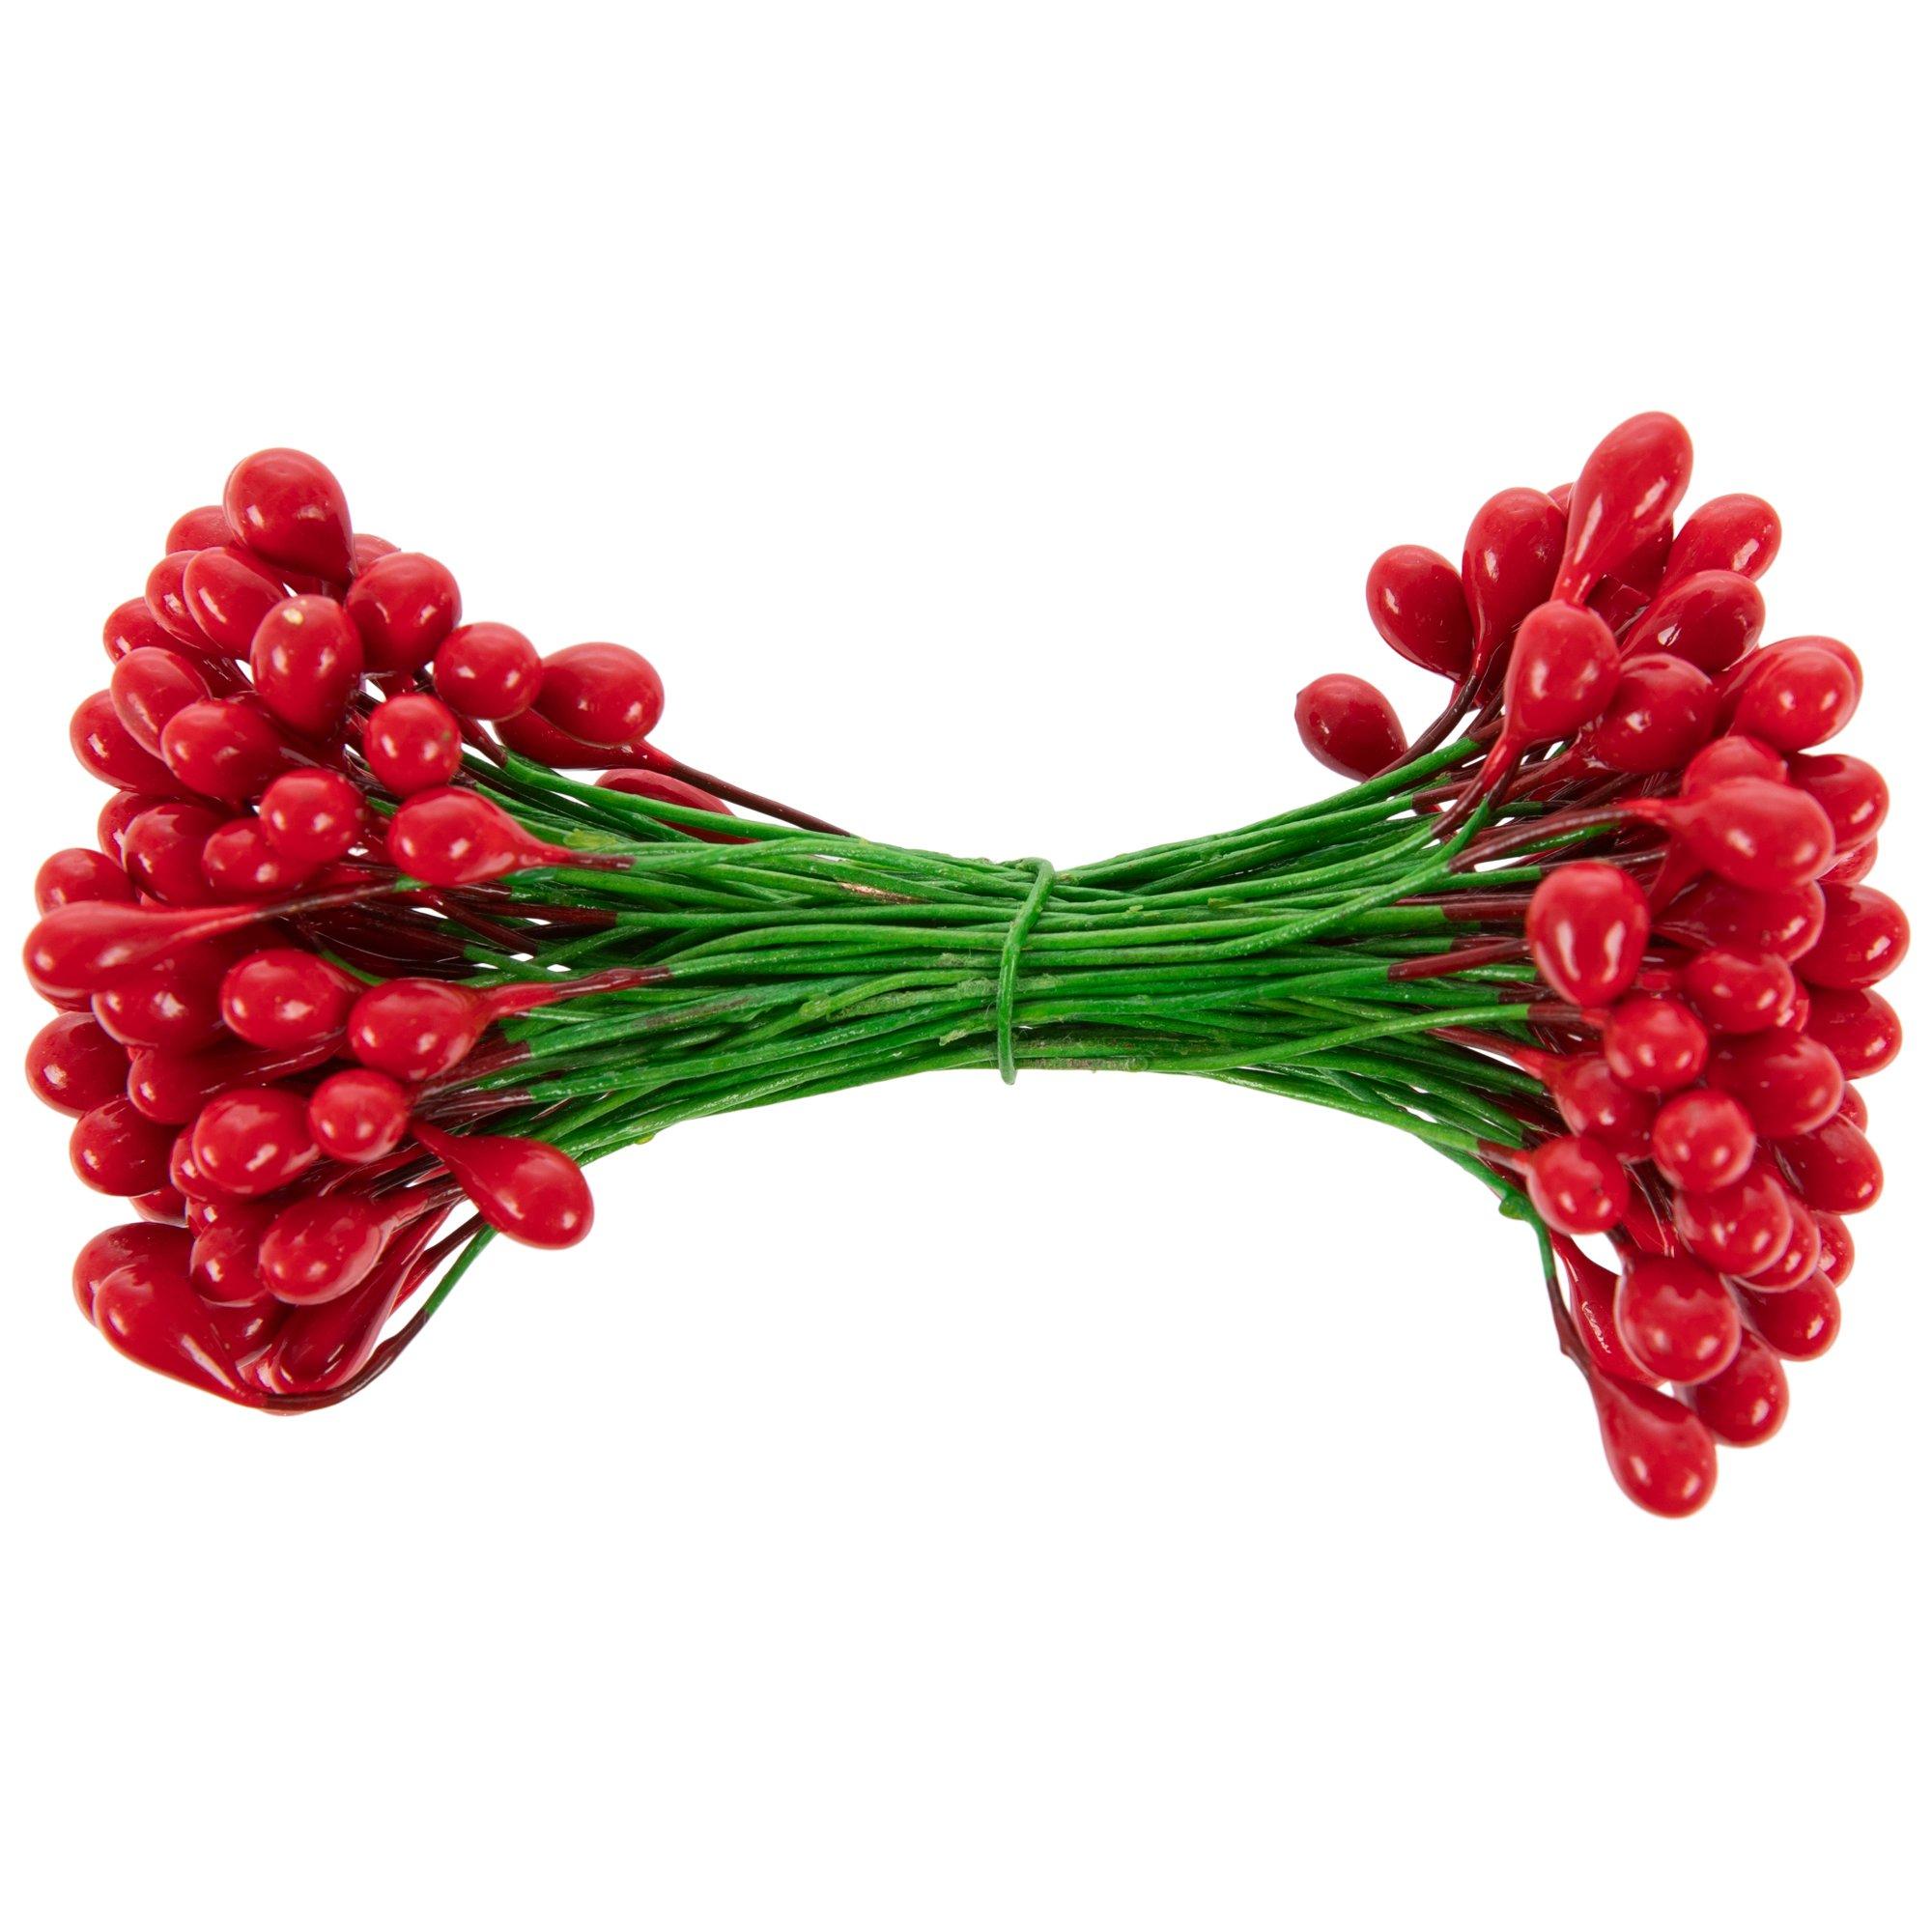 Red Berries for Holiday Decorations - UF/IFAS Extension Orange County